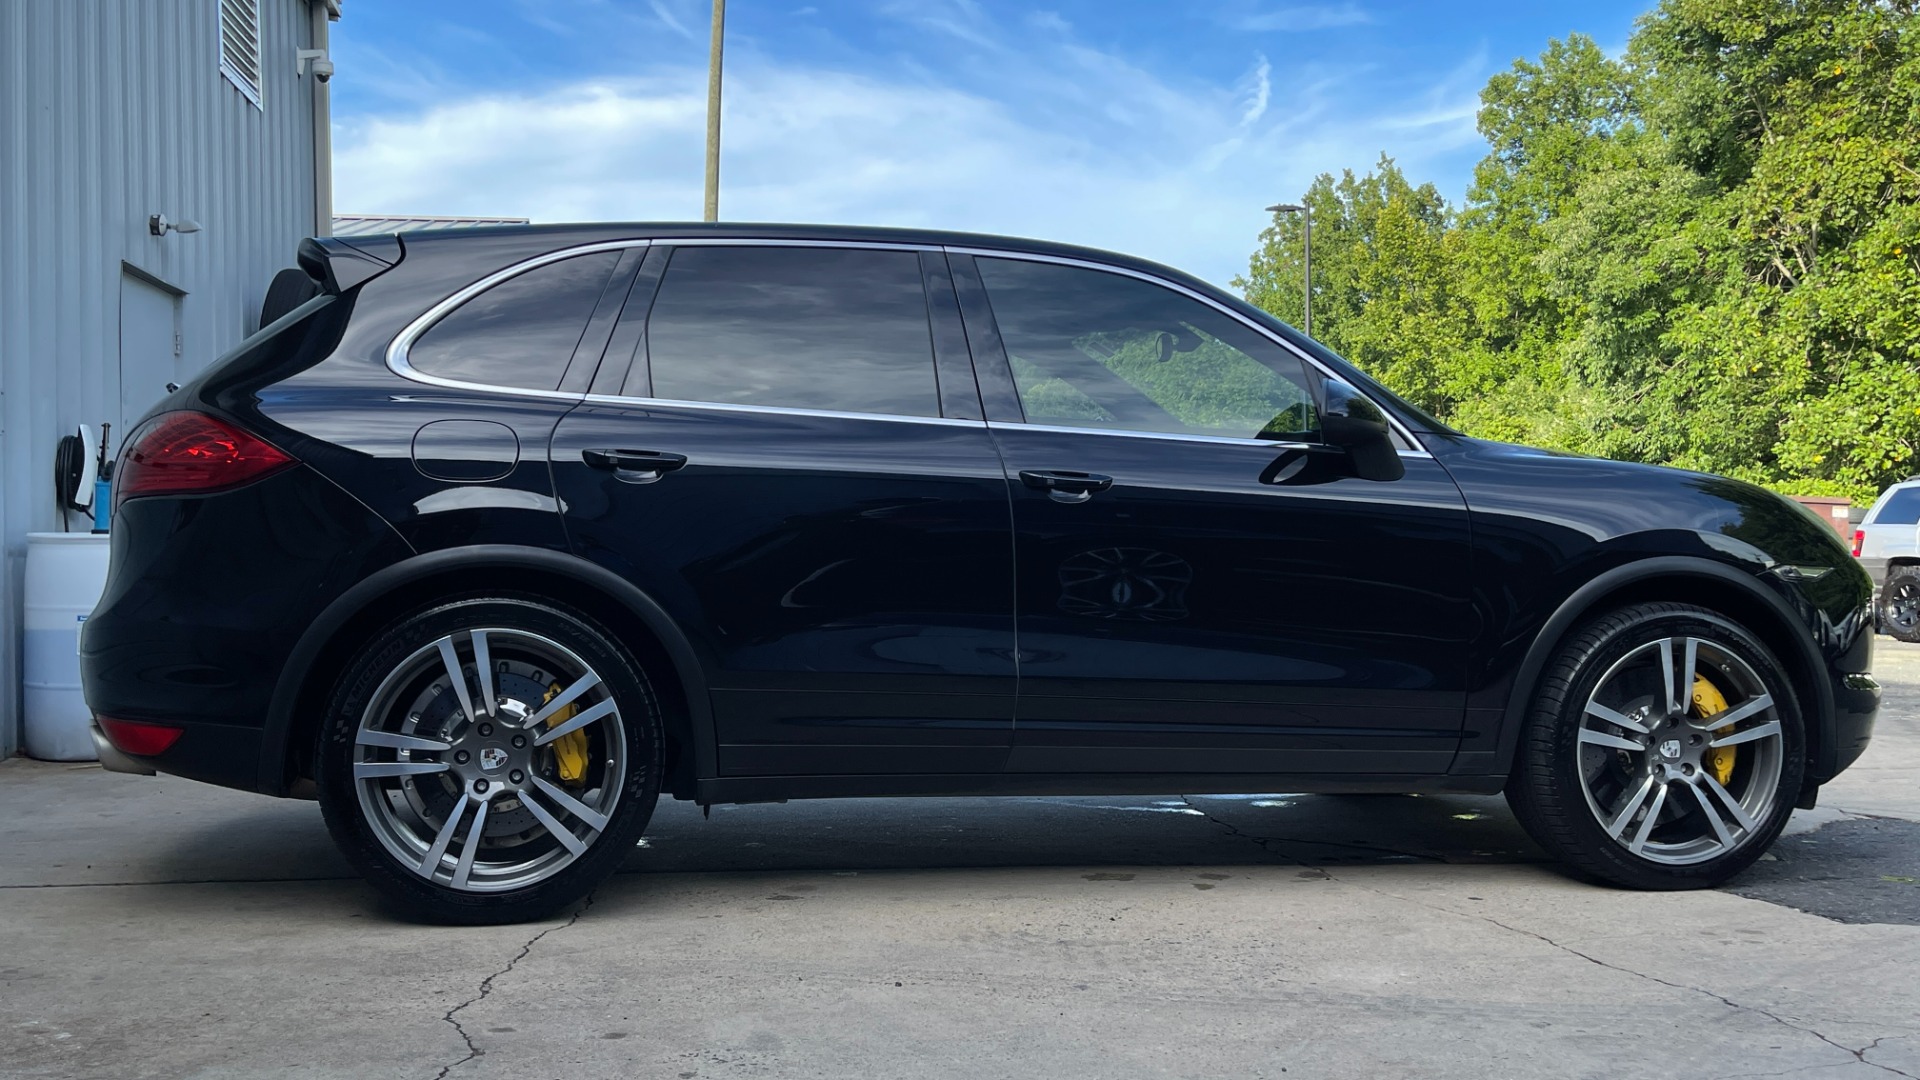 Used 2011 Porsche Cayenne Turbo / CARBON CERAMICS / CARBON FIBER TRIM / 21IN WHEELS / PREMIUM PACKAGE for sale $30,900 at Formula Imports in Charlotte NC 28227 11